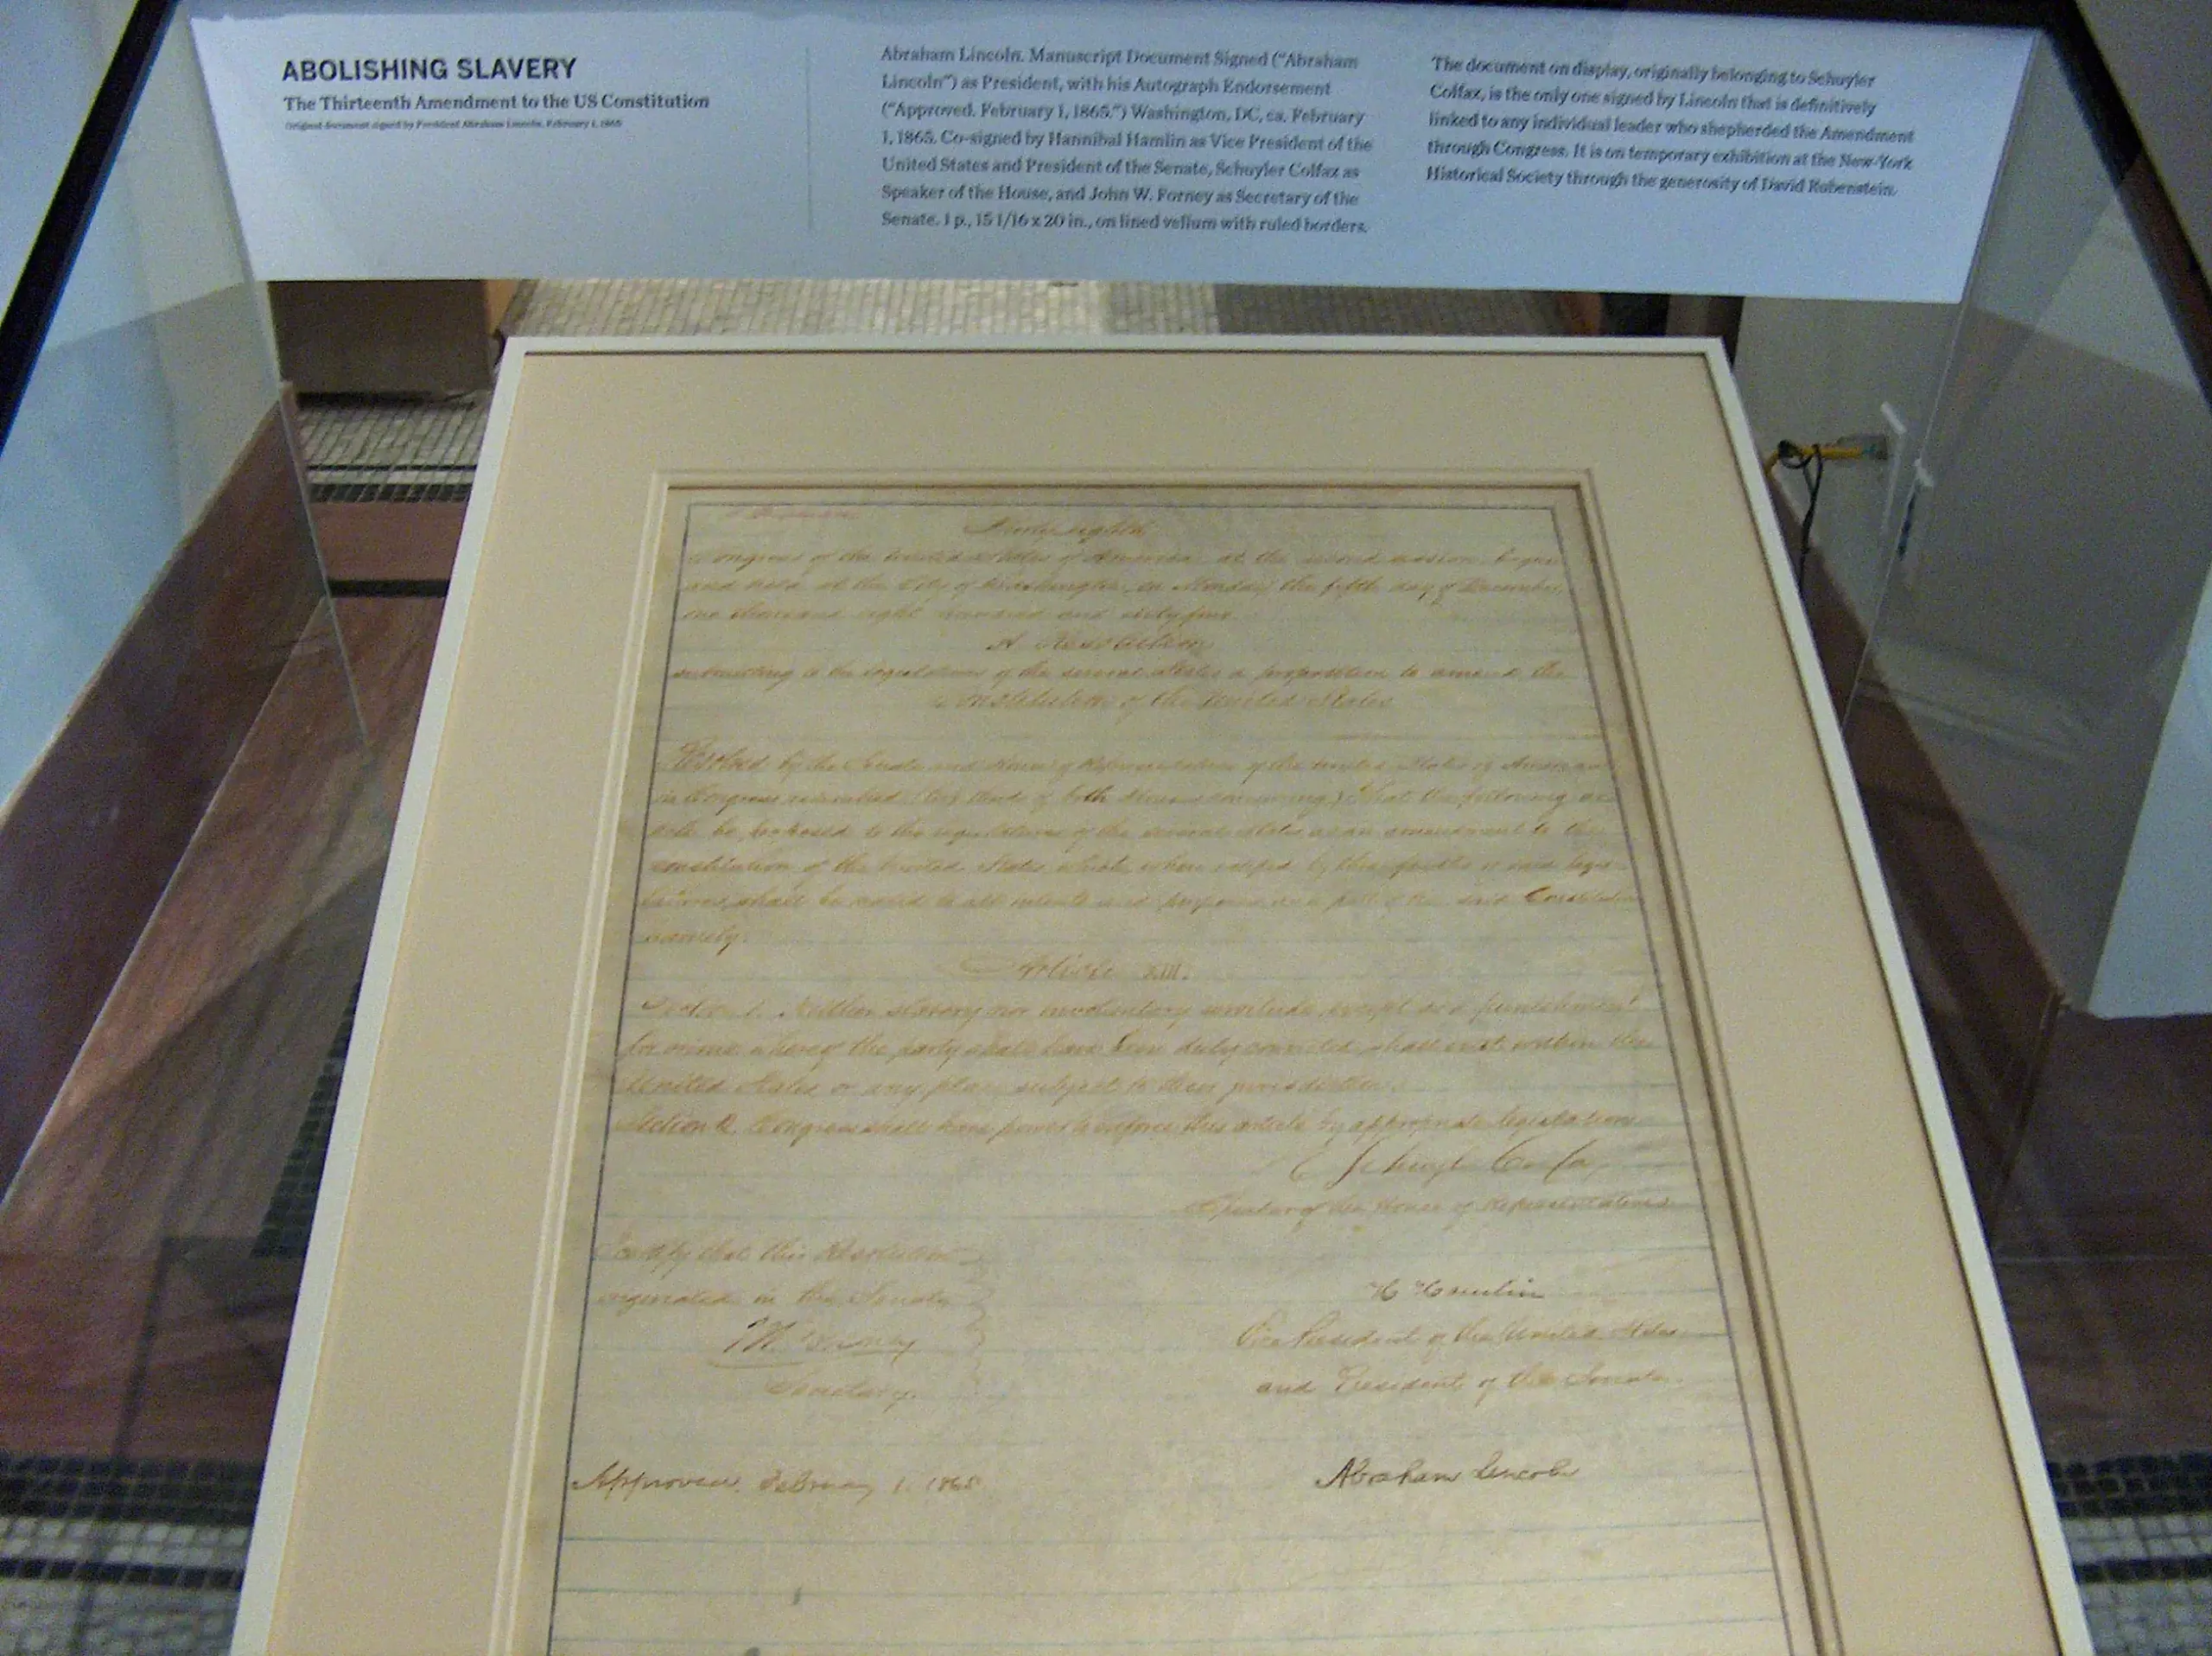 The rare handwritten copy of the Thirteenth Amendment to the Constitution signed by Abraham Lincoln.